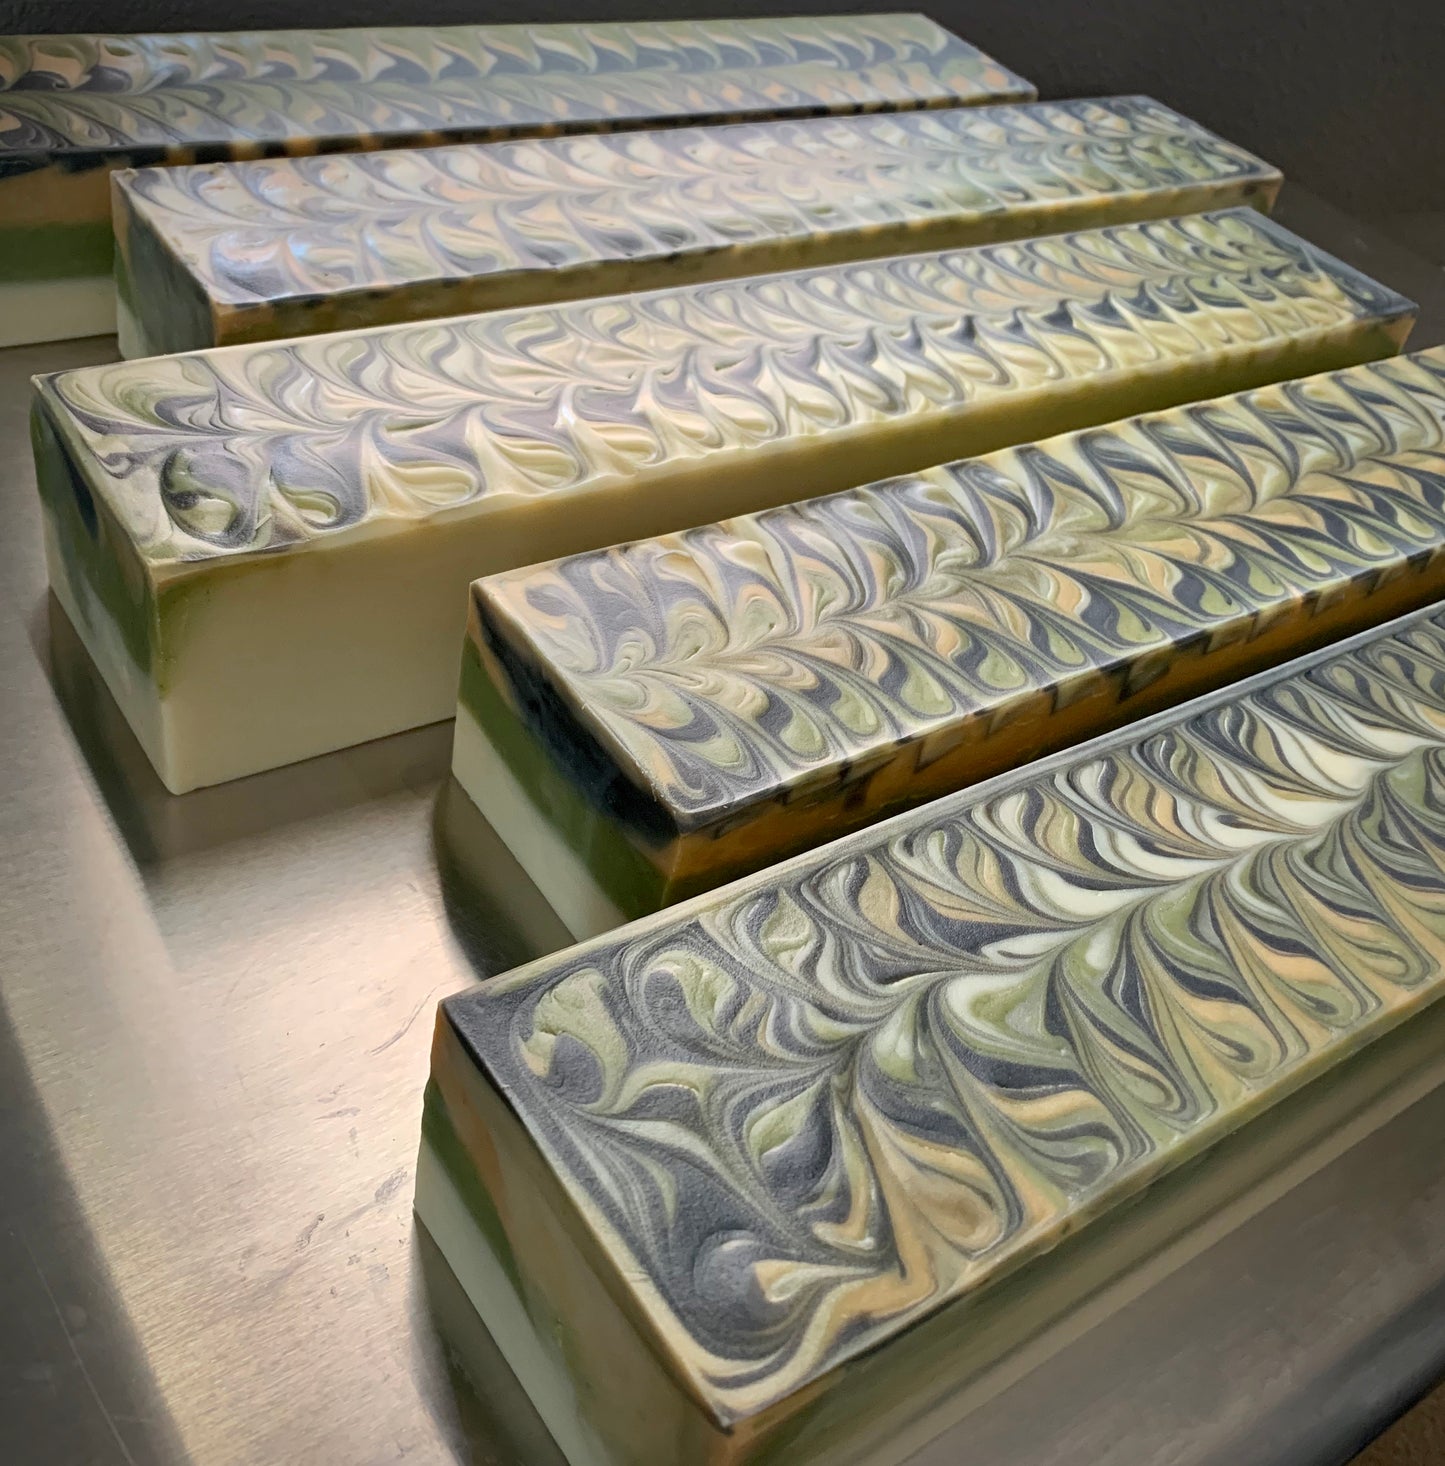 Levee Leaf // Cedar Rosemary Soap with Charcoal, Clay & Spinach